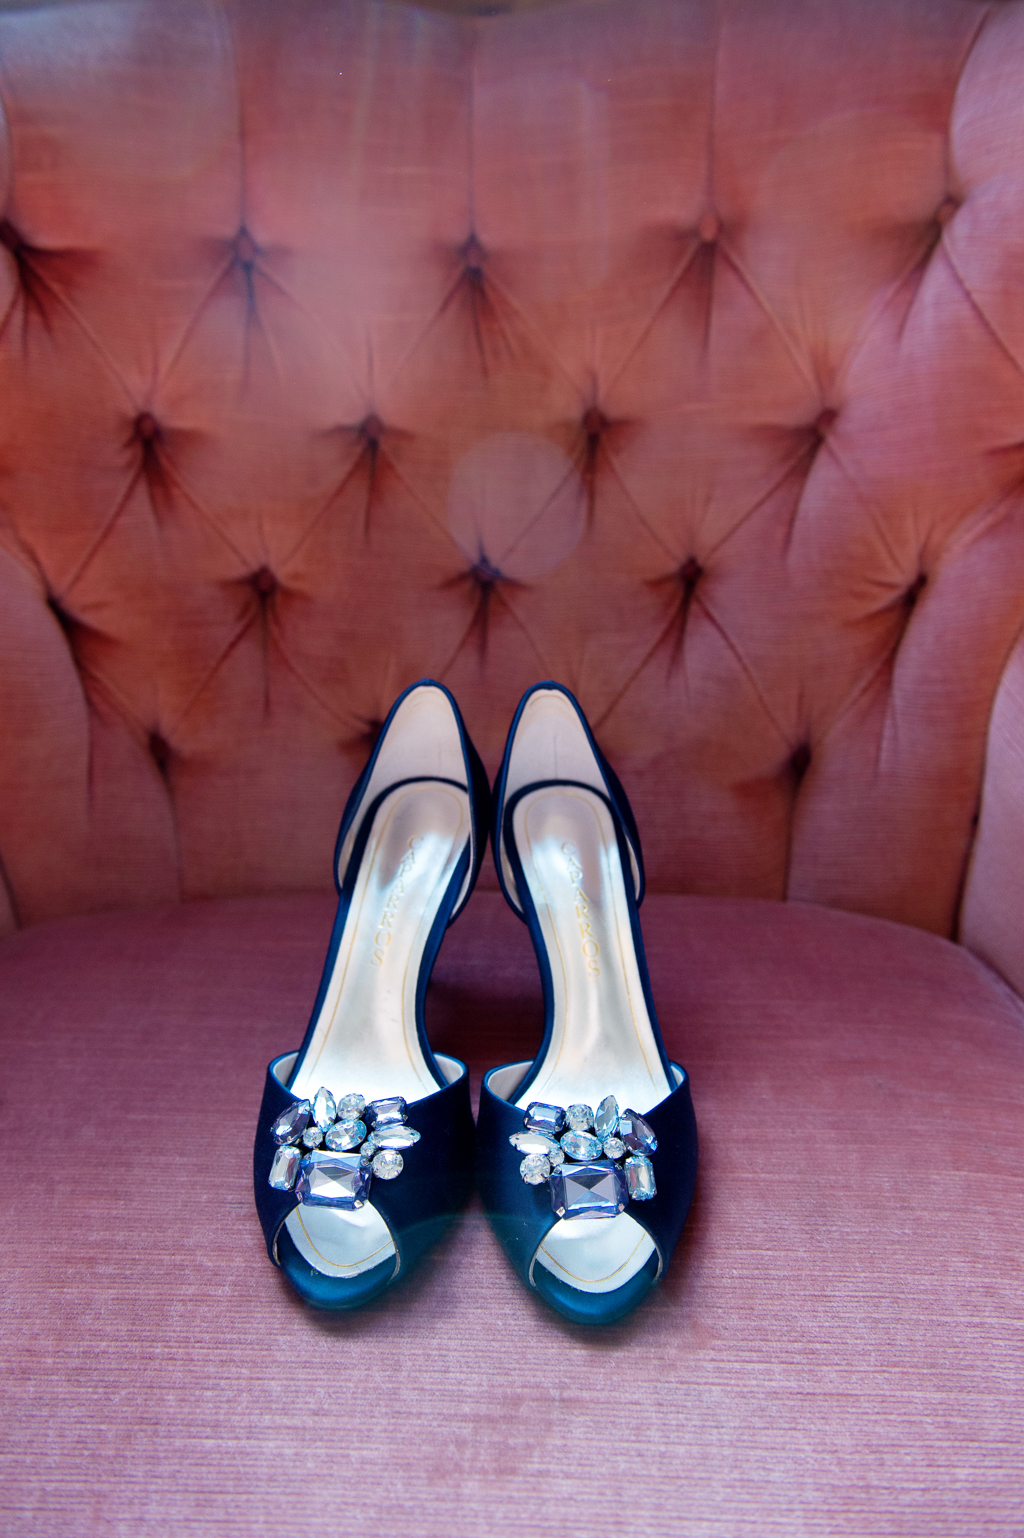 navy blue wedding shoes with diamond rhinestones sit on a pink tufted chair